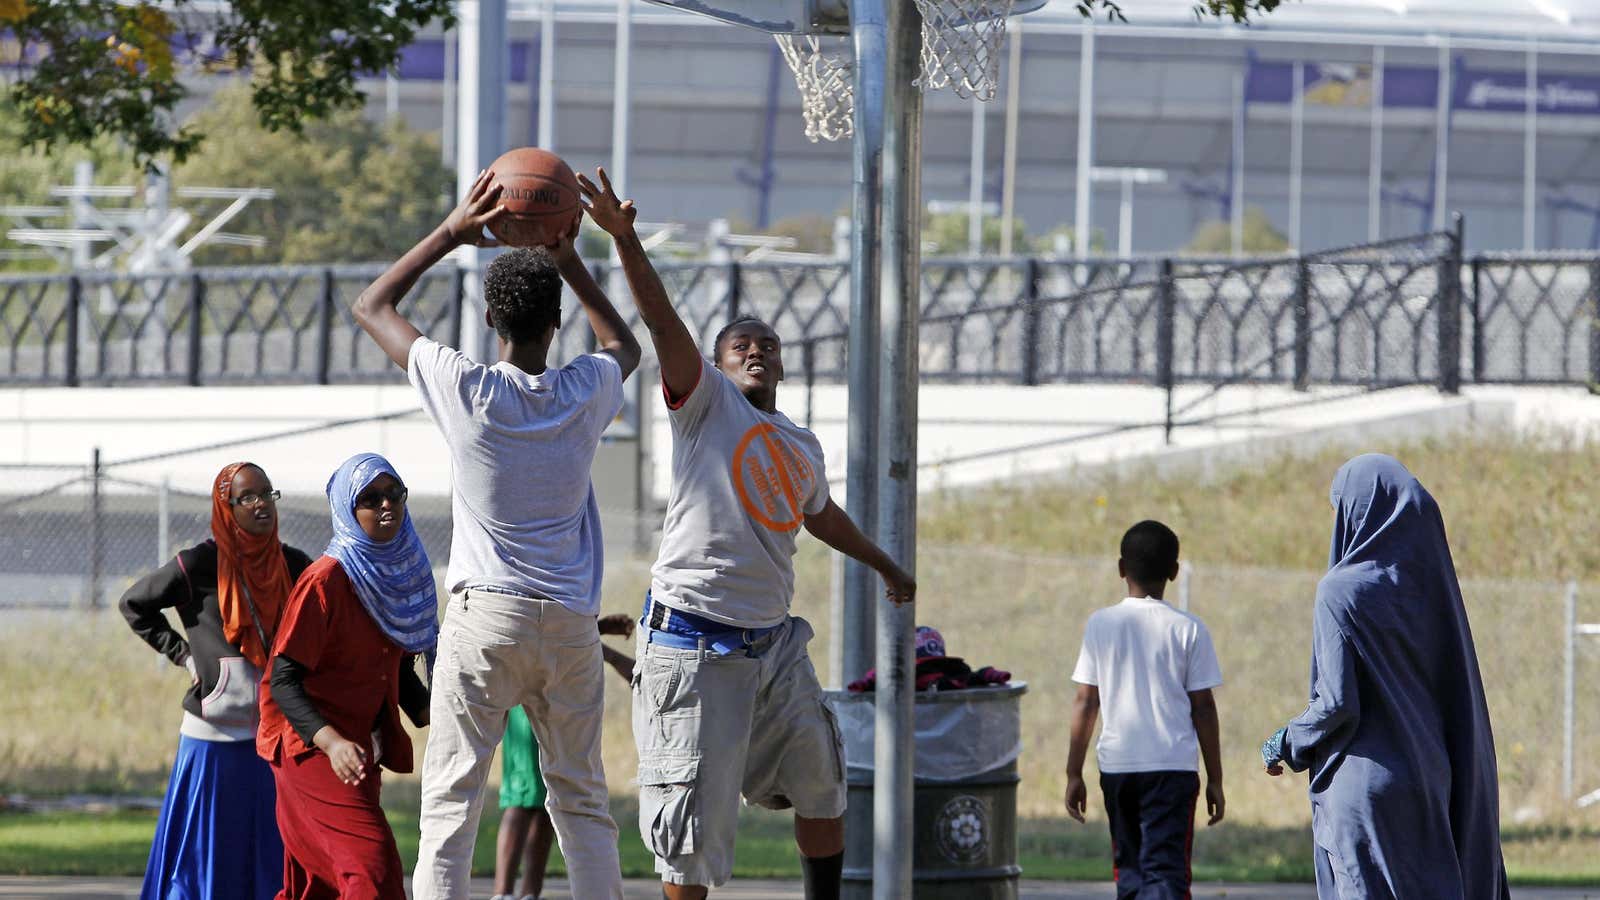 Somali youths playing basketball  in Minneapolis